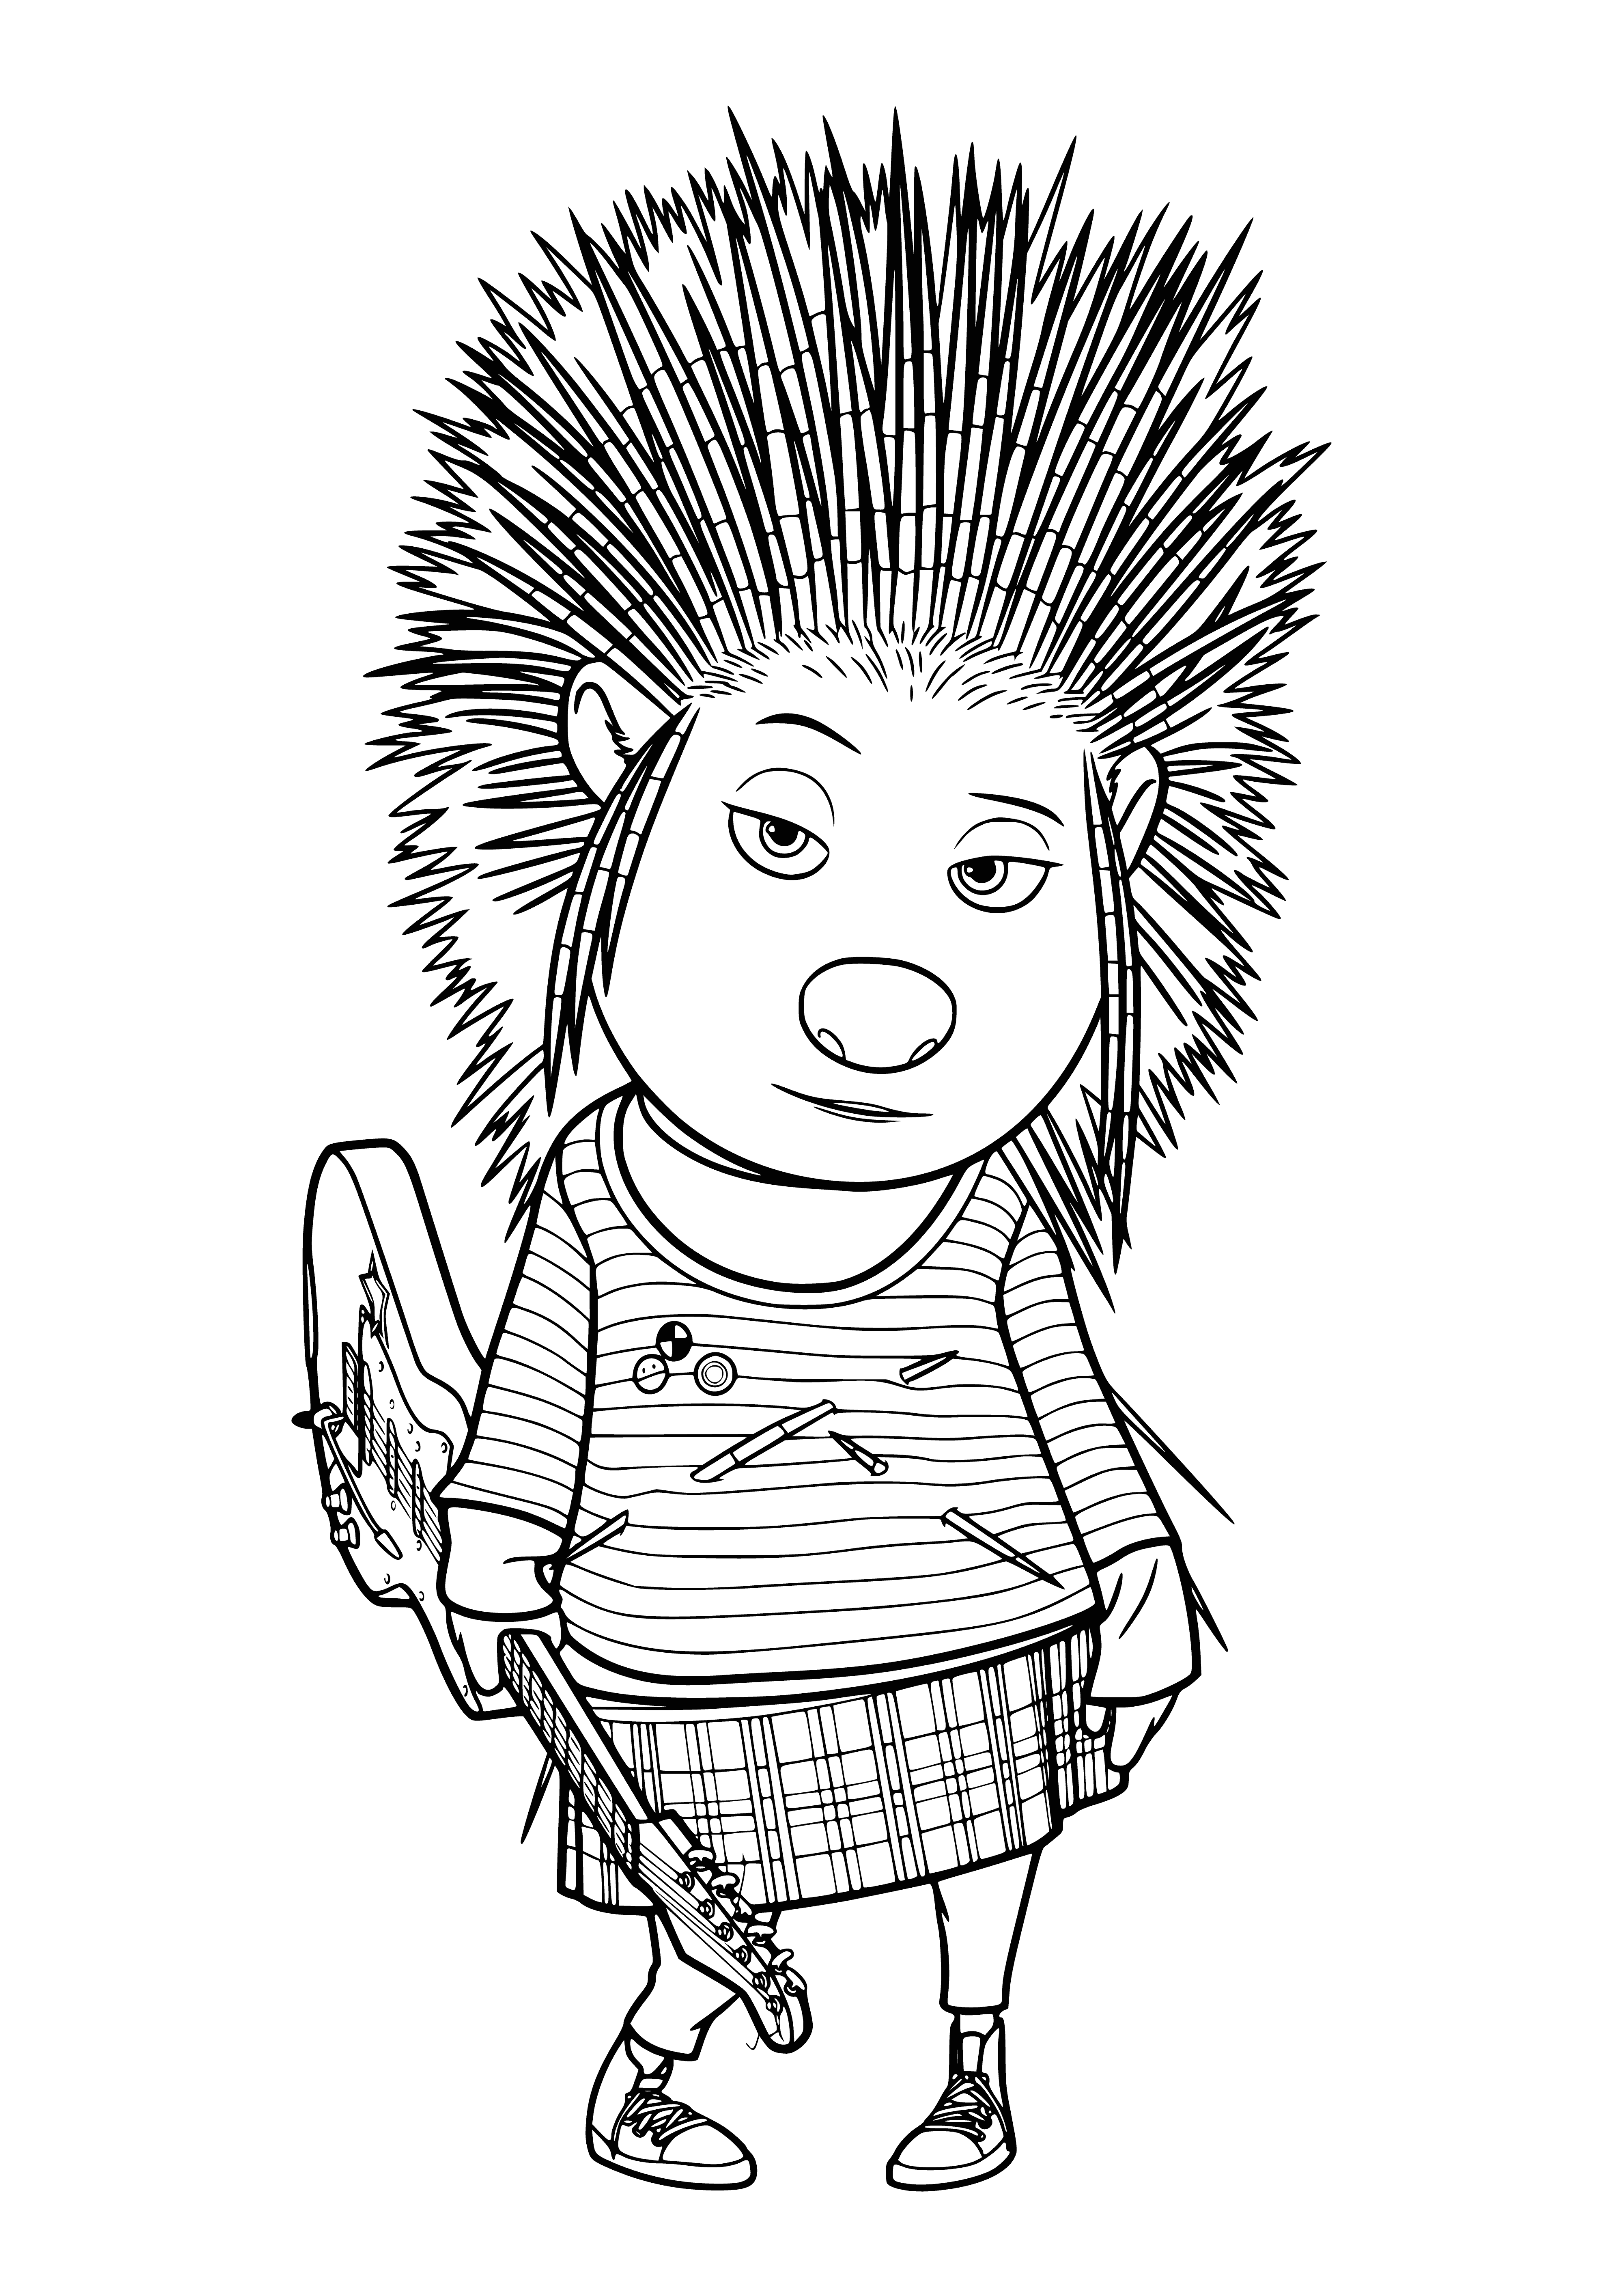 coloring page: A porcupine with long snout, small eyes, and black/white fur, with visible quills on its back. #coloringpage